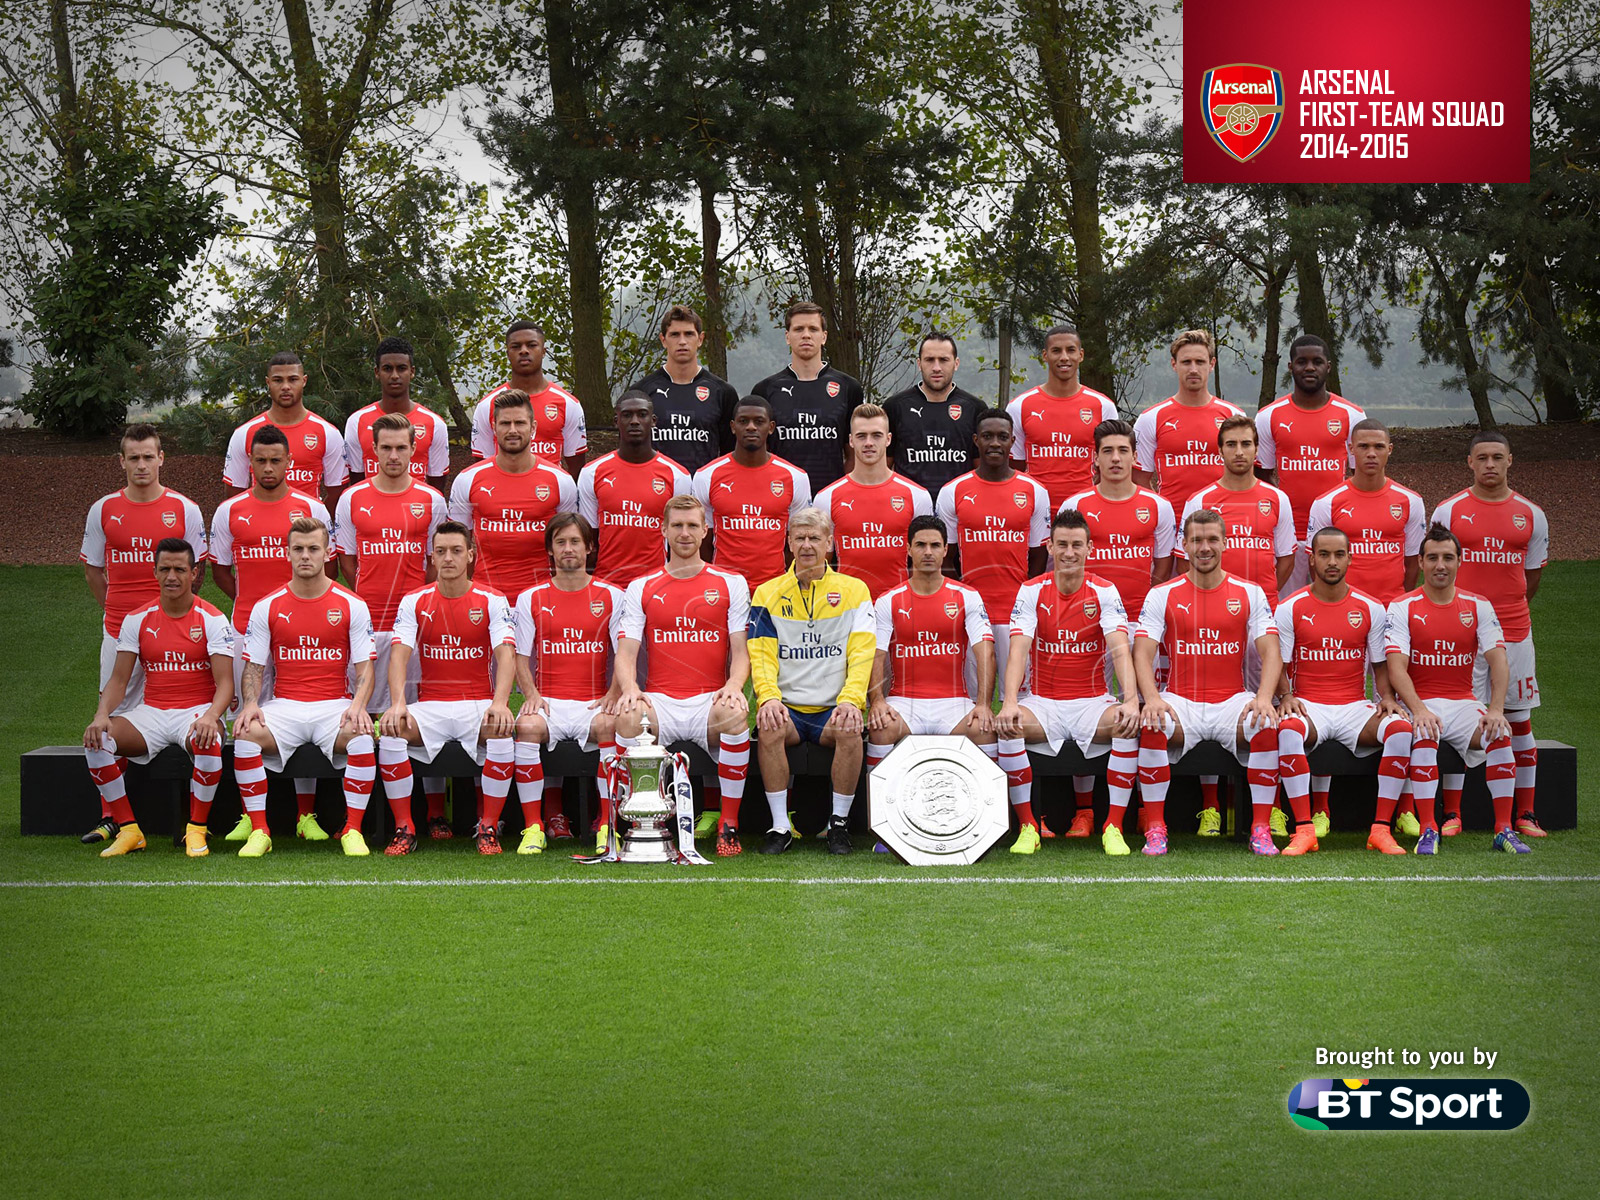 2015 Arsenal Hd Wallpapers Junior Wallpapers Games Dow 1600x1200